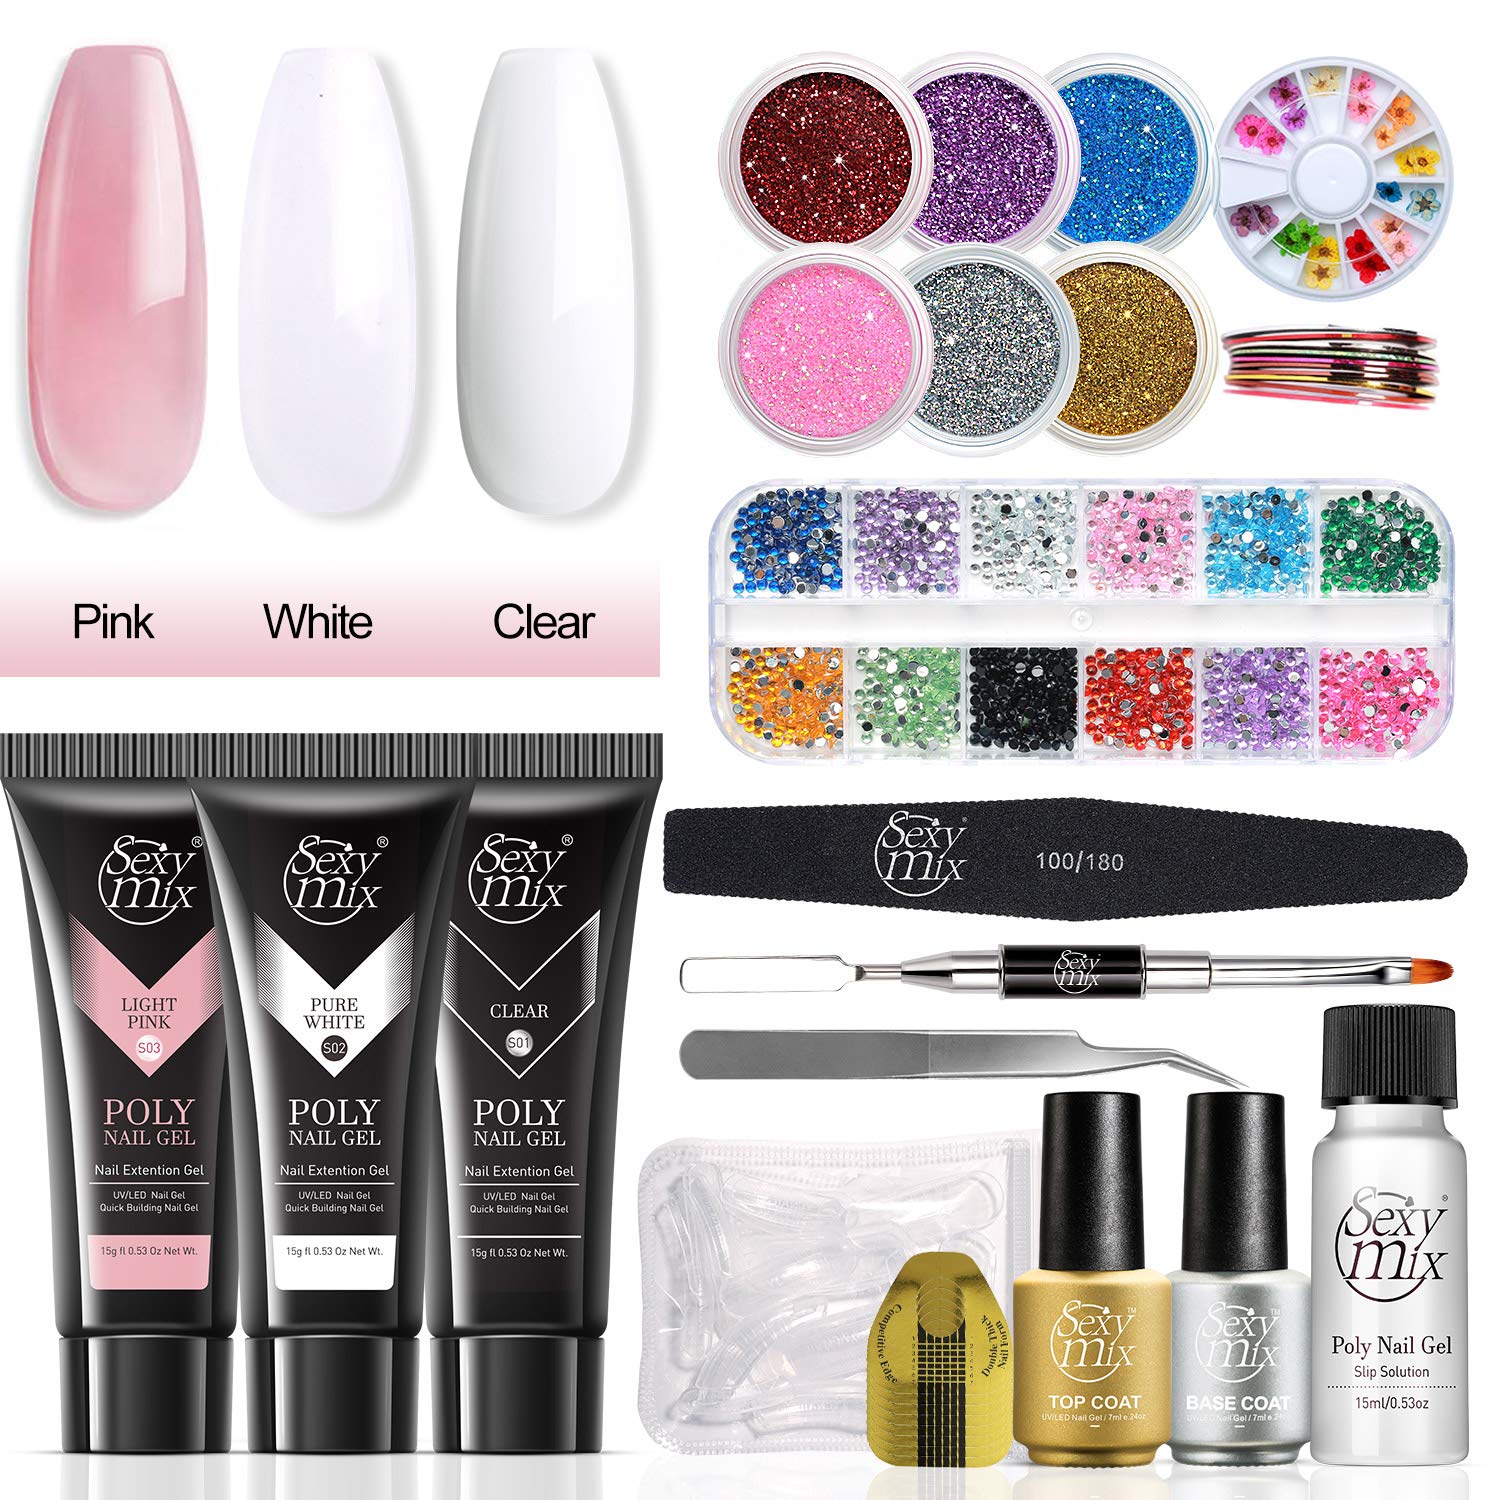 10 Best Nail Art Kits in 2022 Reviews with Buying Guide - Radar Magazine